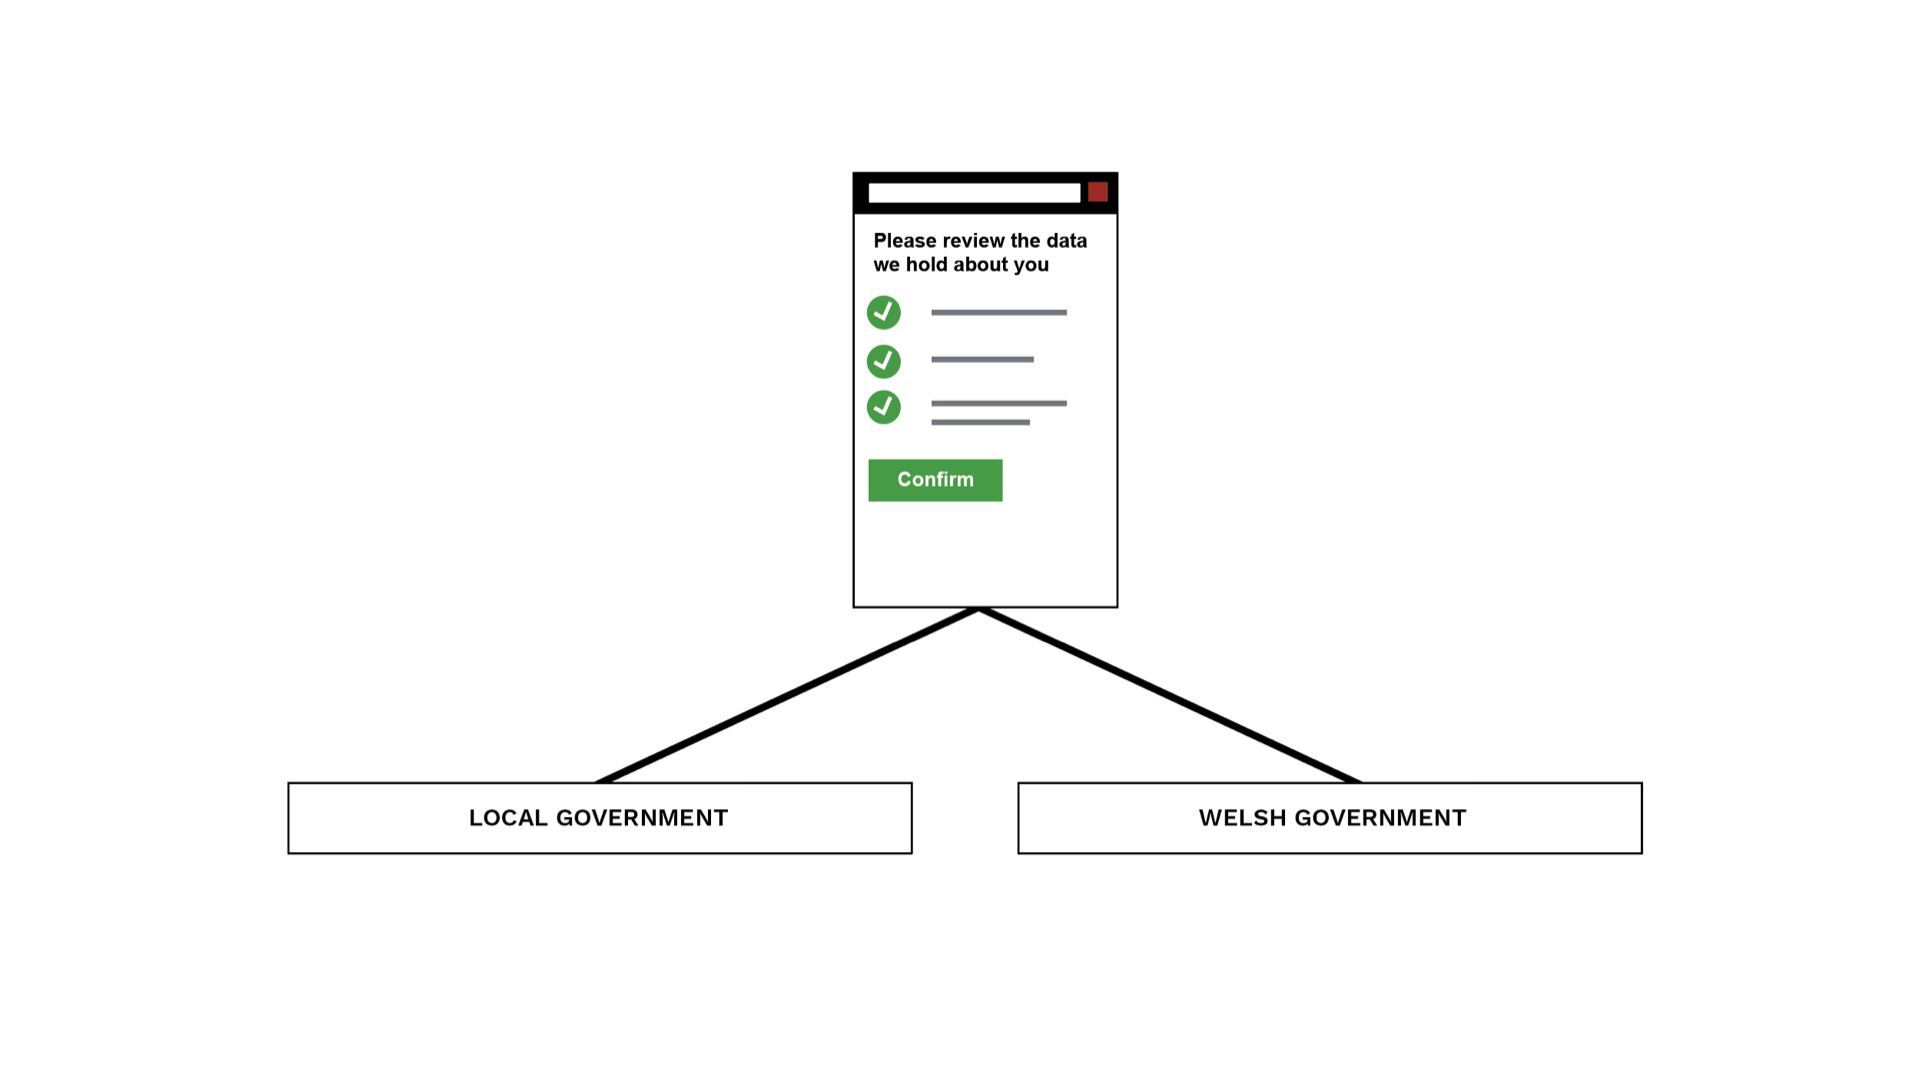 A simplified wireframe of a start page of a government service called. The title of the page is: Sign in to manage your household account.